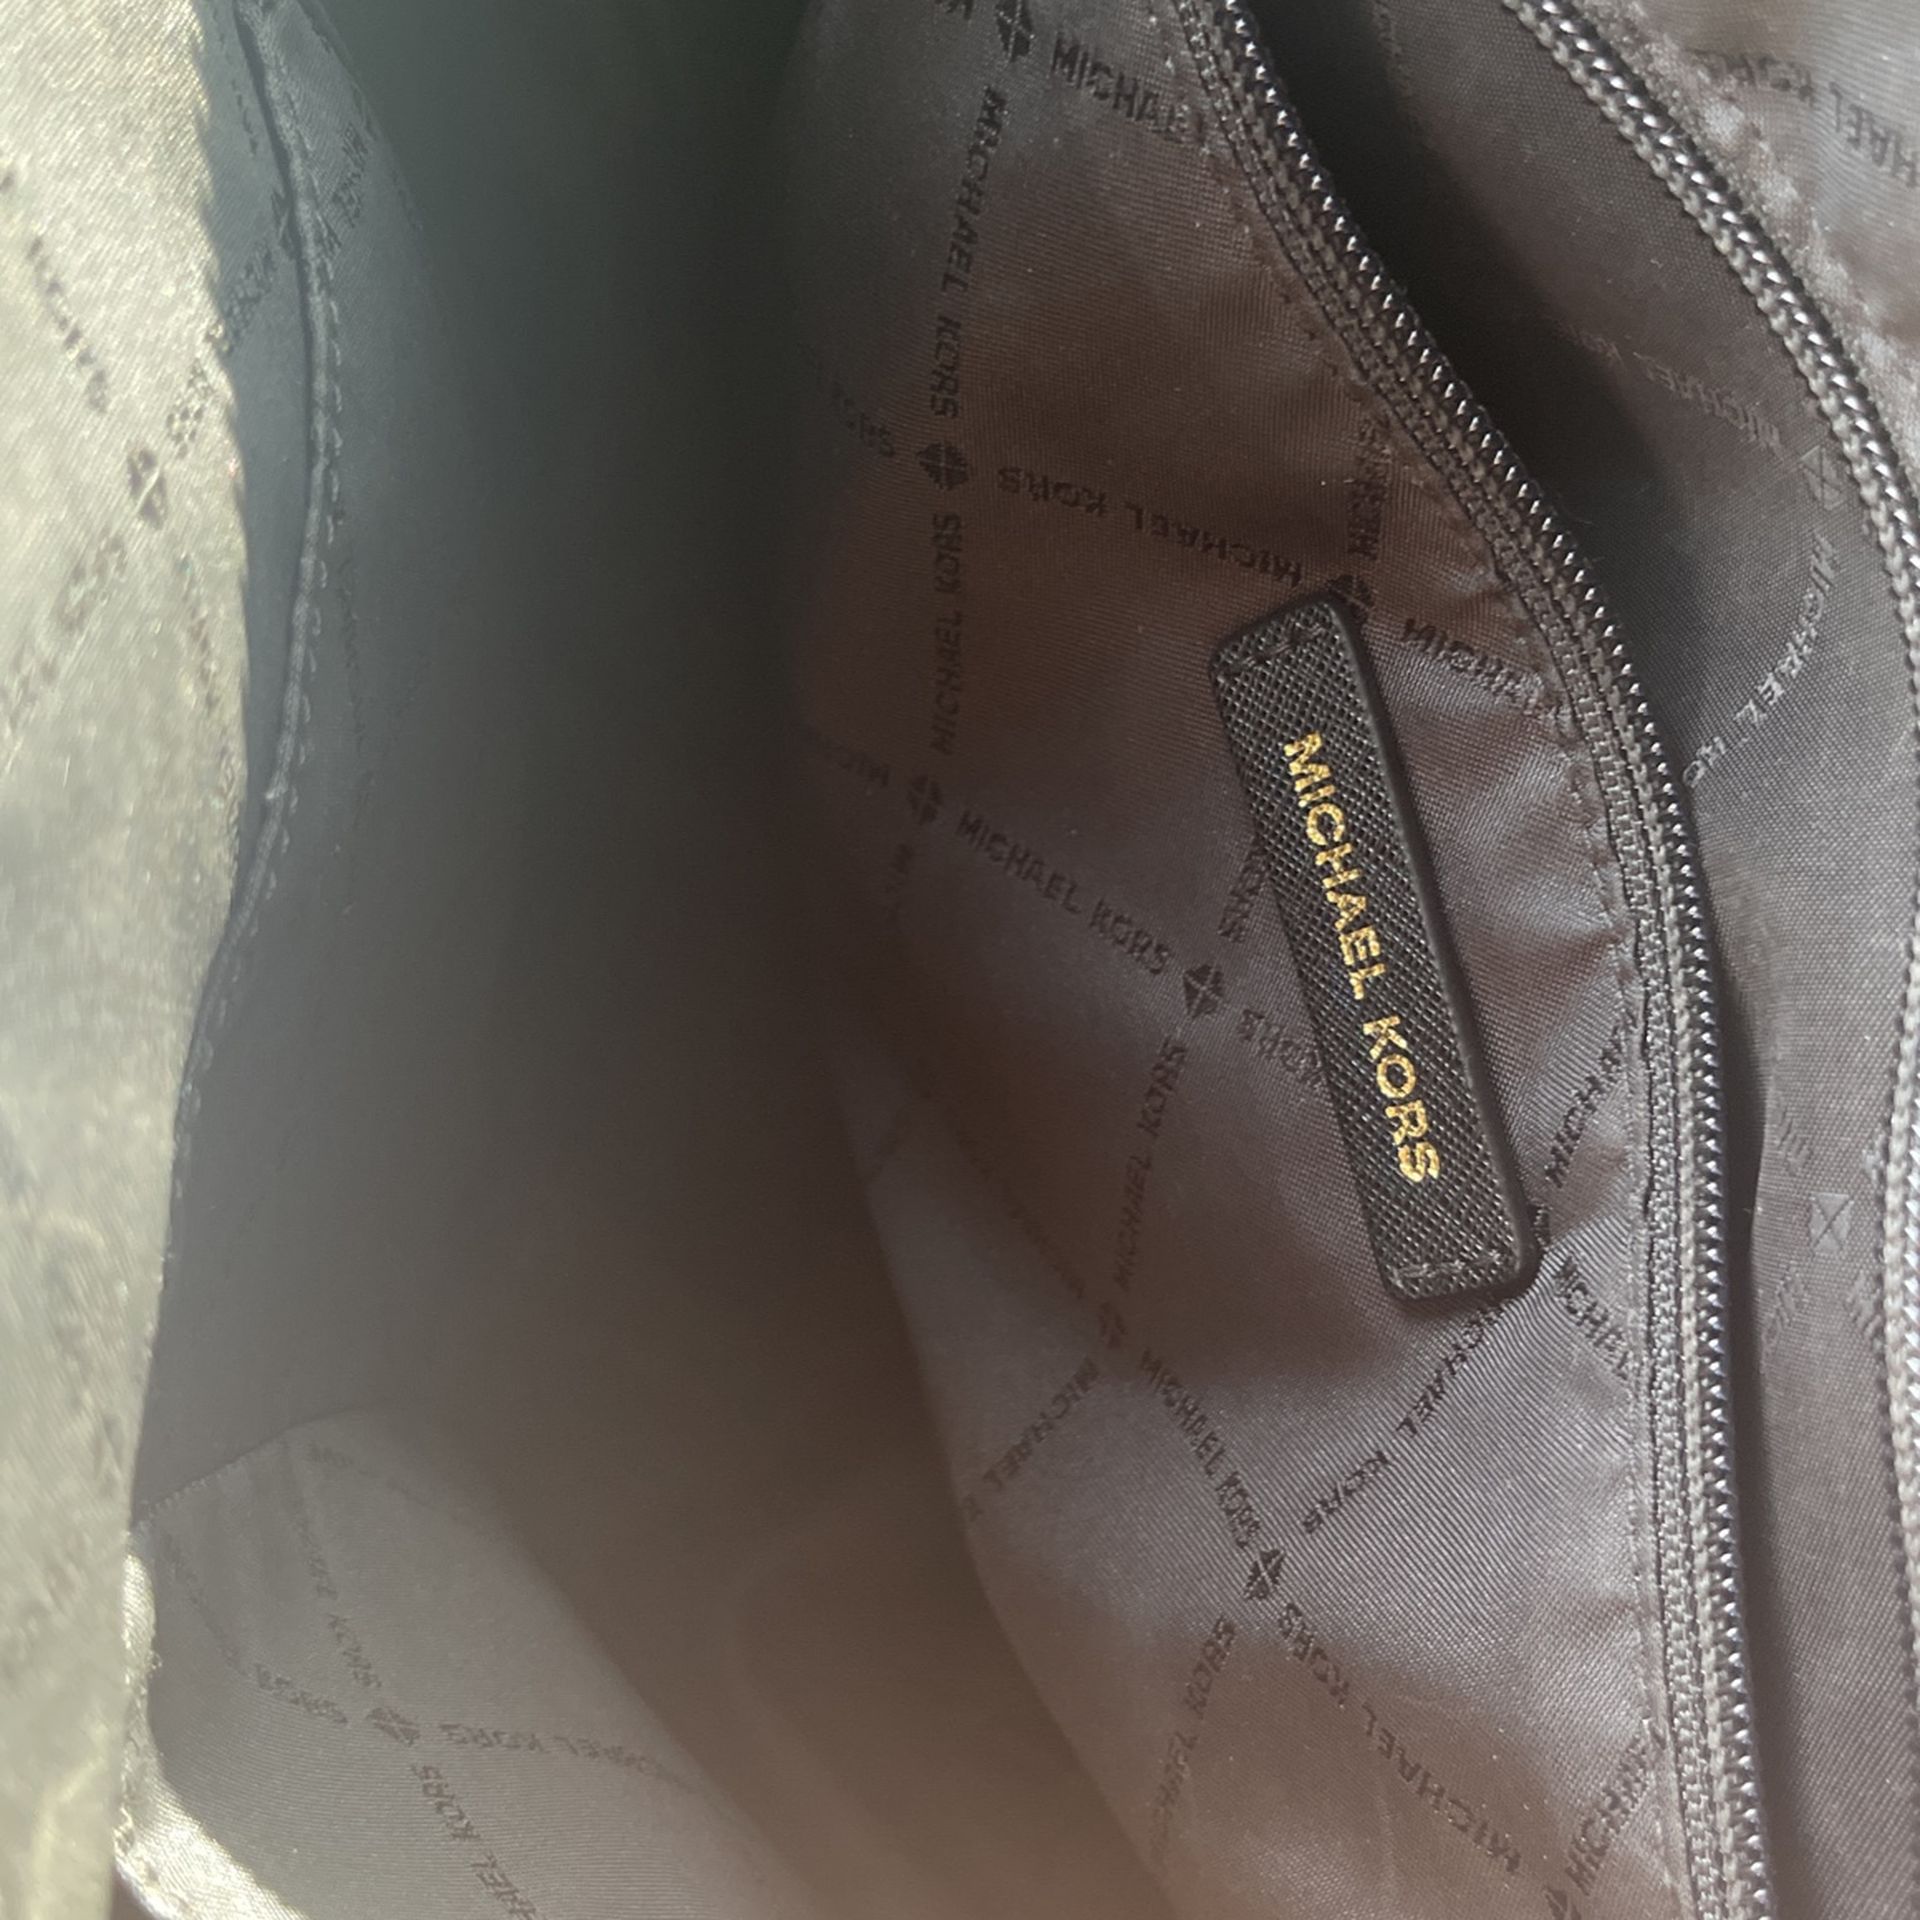 Michael Kors Blue Purse for Sale in Paramount, CA - OfferUp